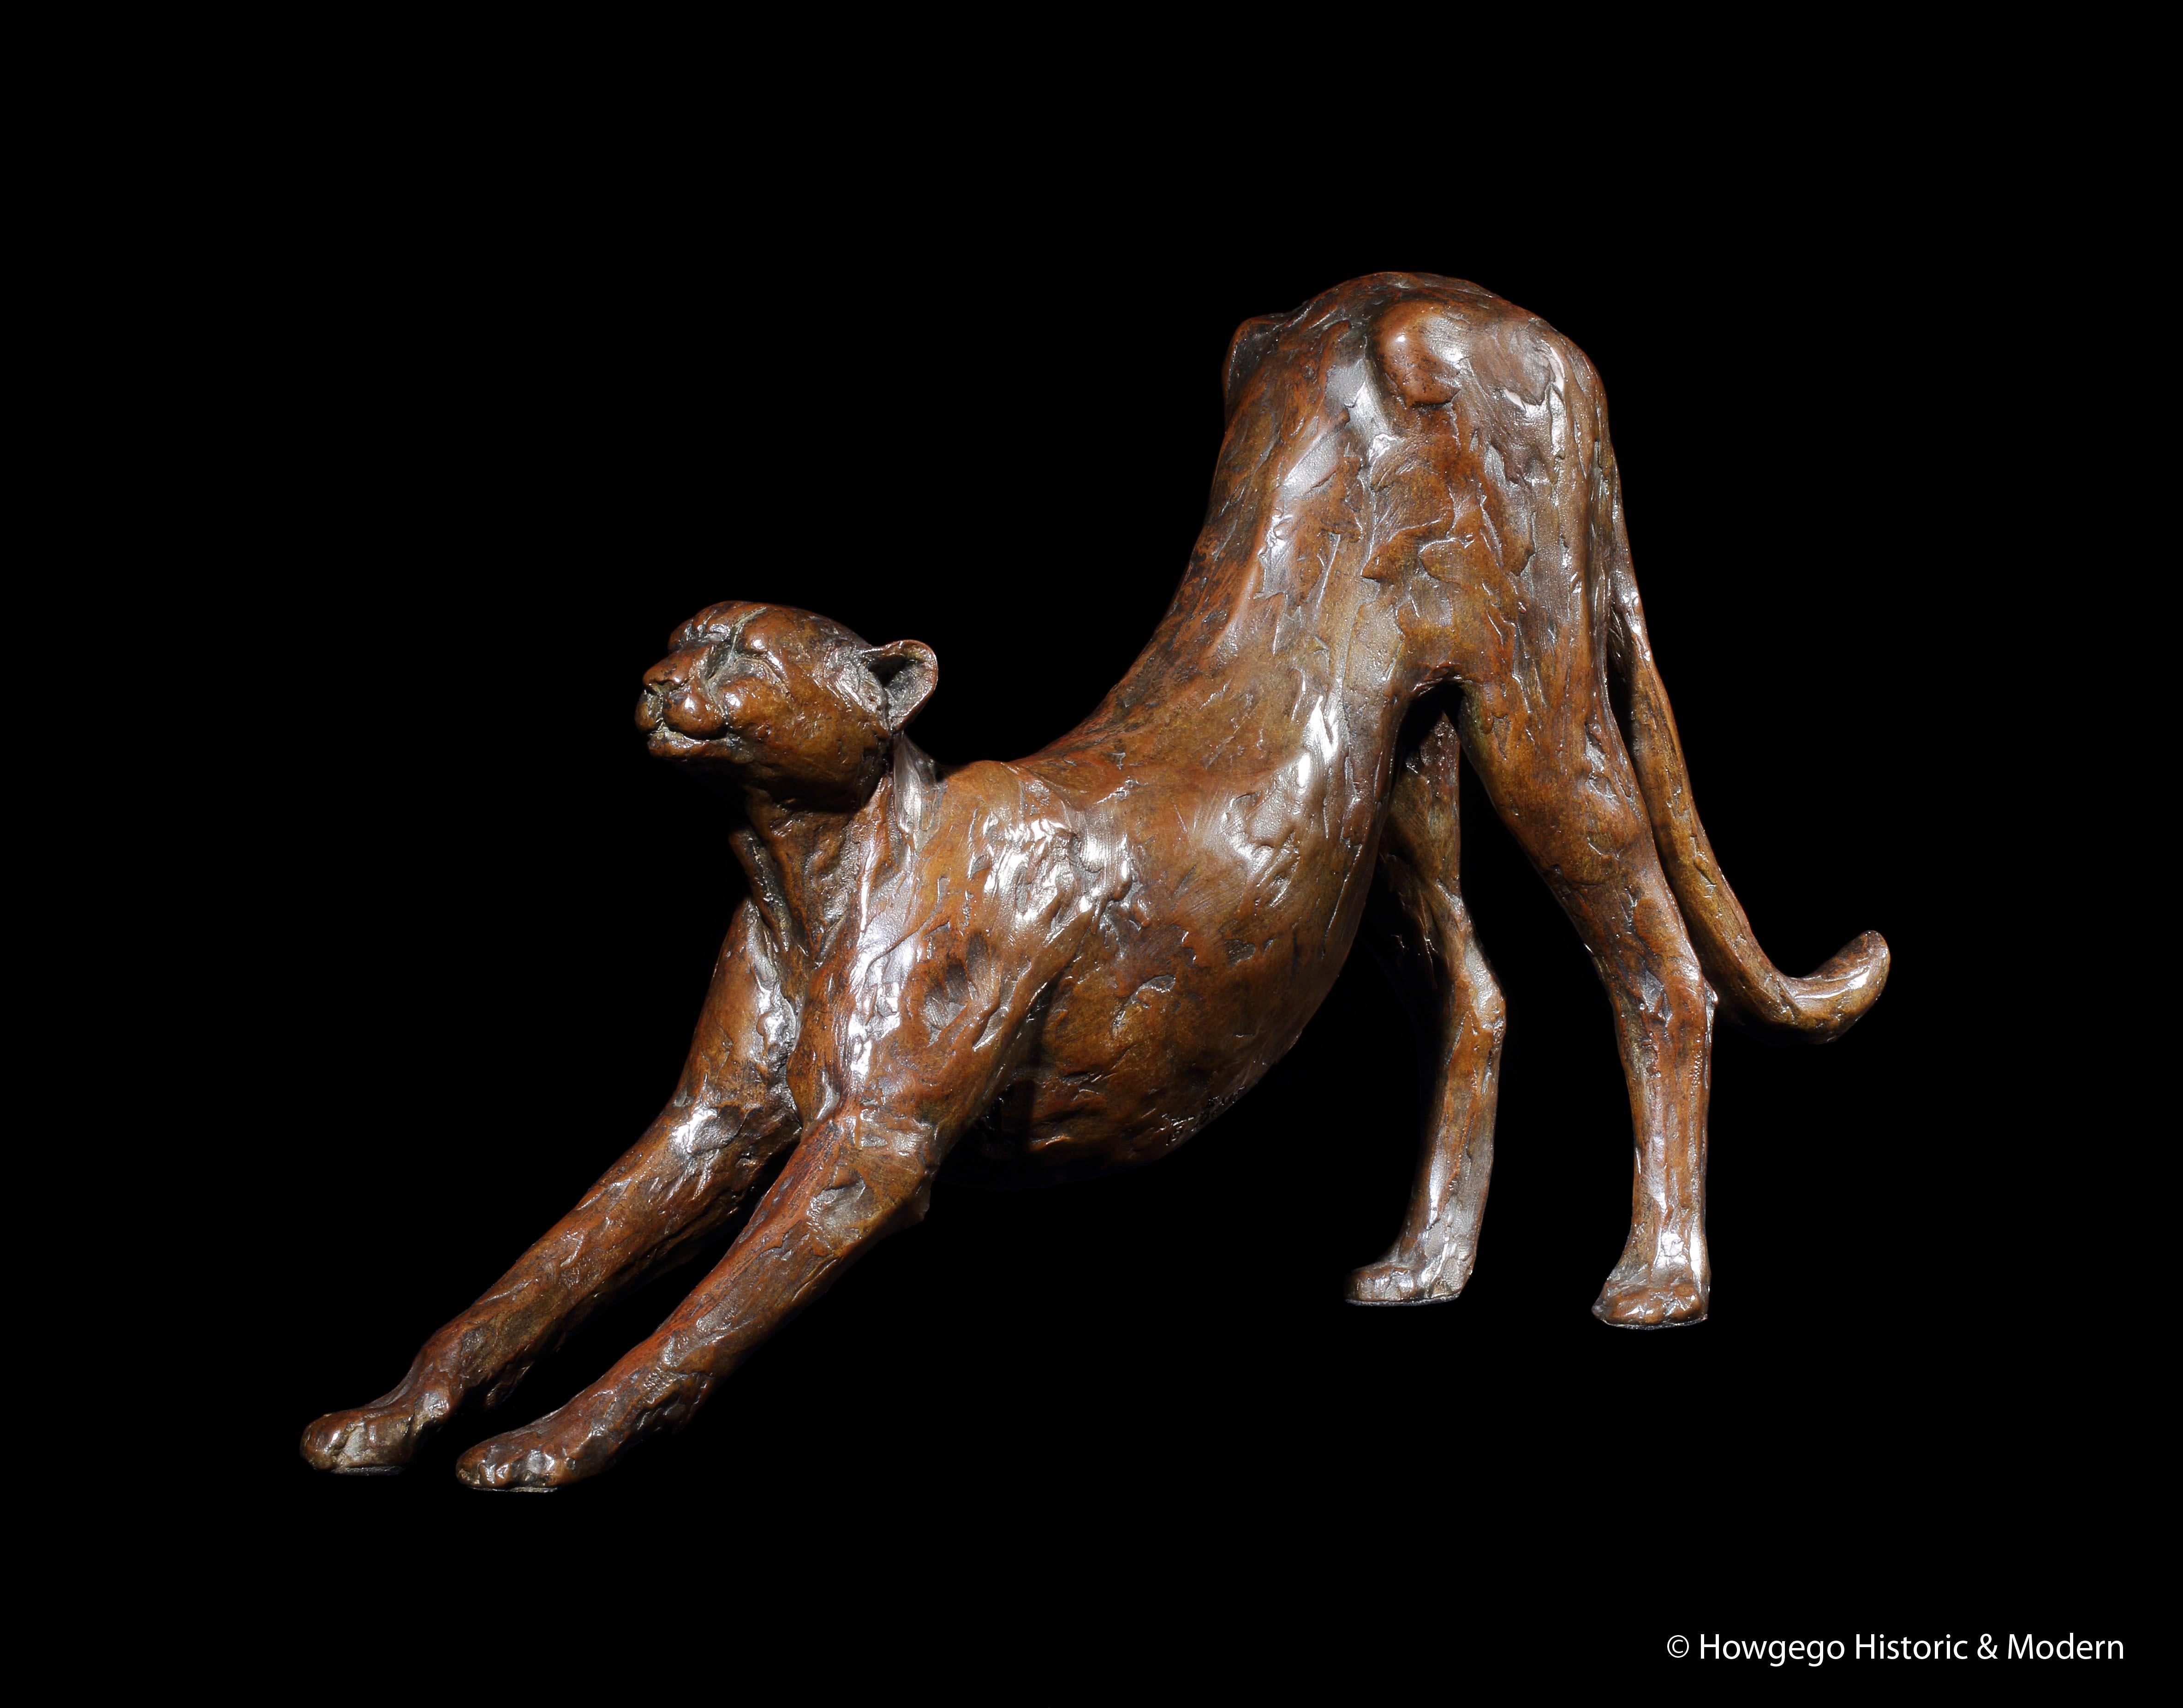 Bronze study of a stretching cheetah.
RHS under the belly bearing Ingwe Foundry stamp, ‘S31’ or ‘S3I’, Edition 3/15, monogram BMR.
Artist unknown.
I have been unsuccessfully resarching who the artist could be.

The stretching pose of the